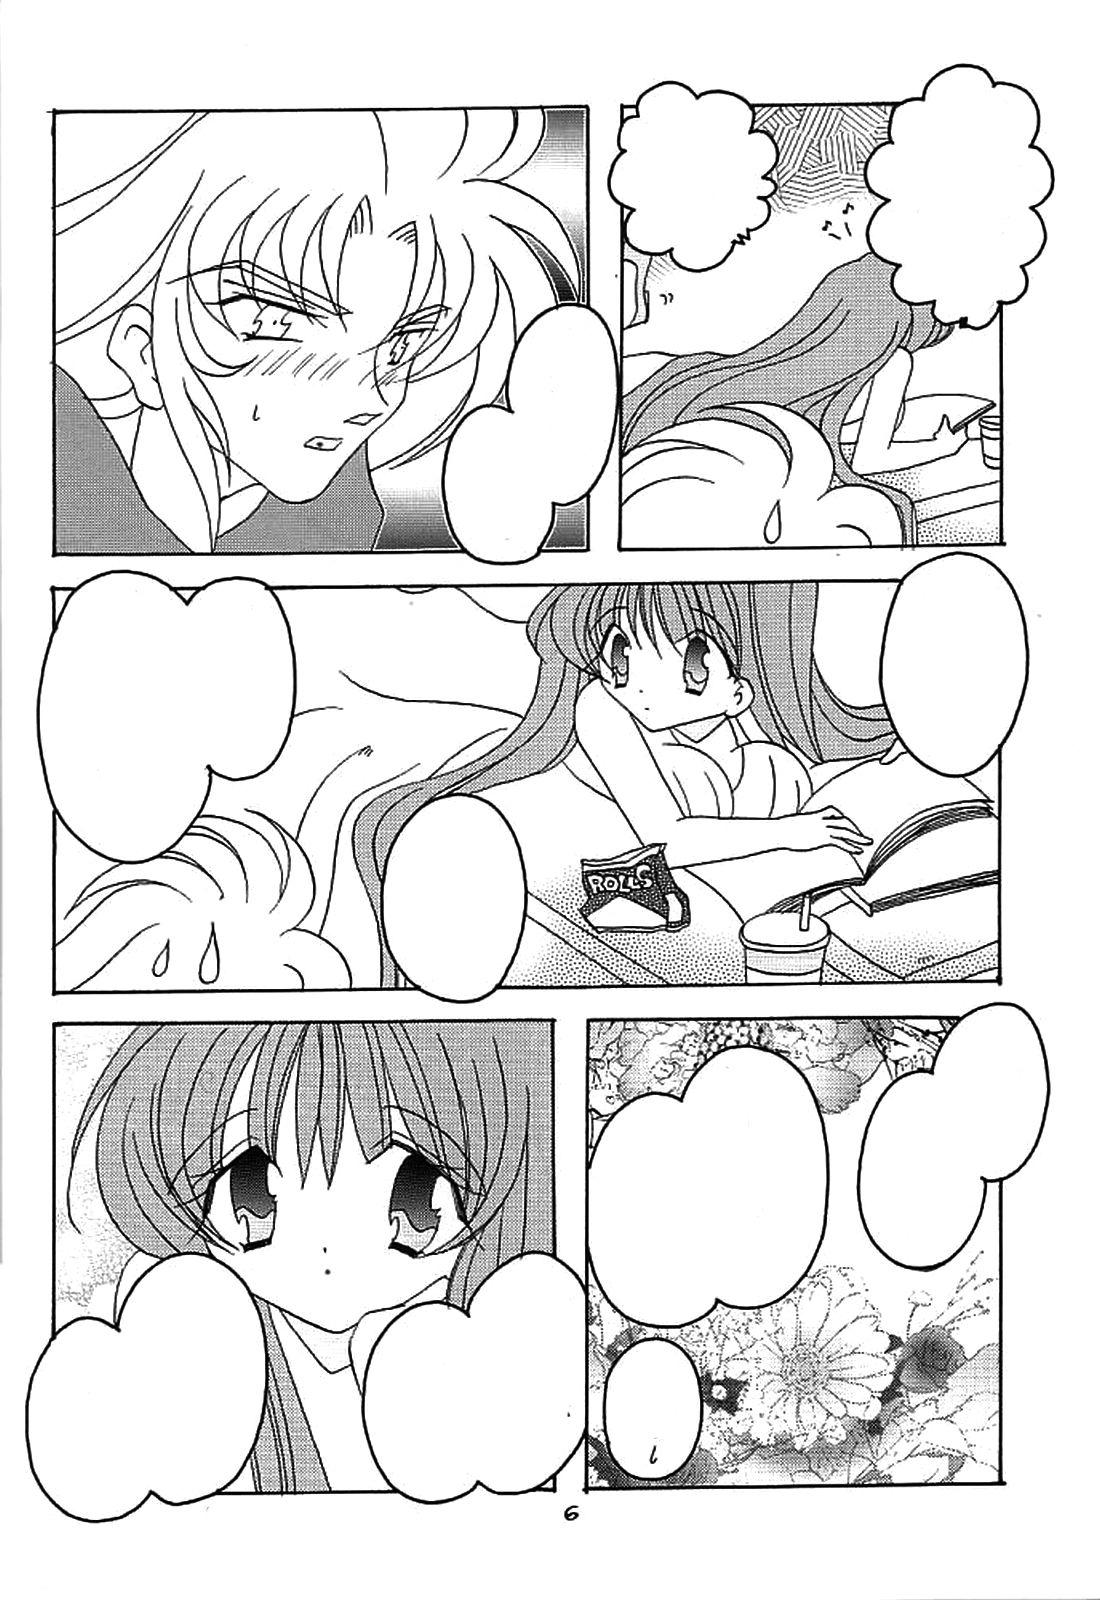 Amateur Sex Tapes You are my Reason to Be 6 - Saint seiya Twerk - Page 5